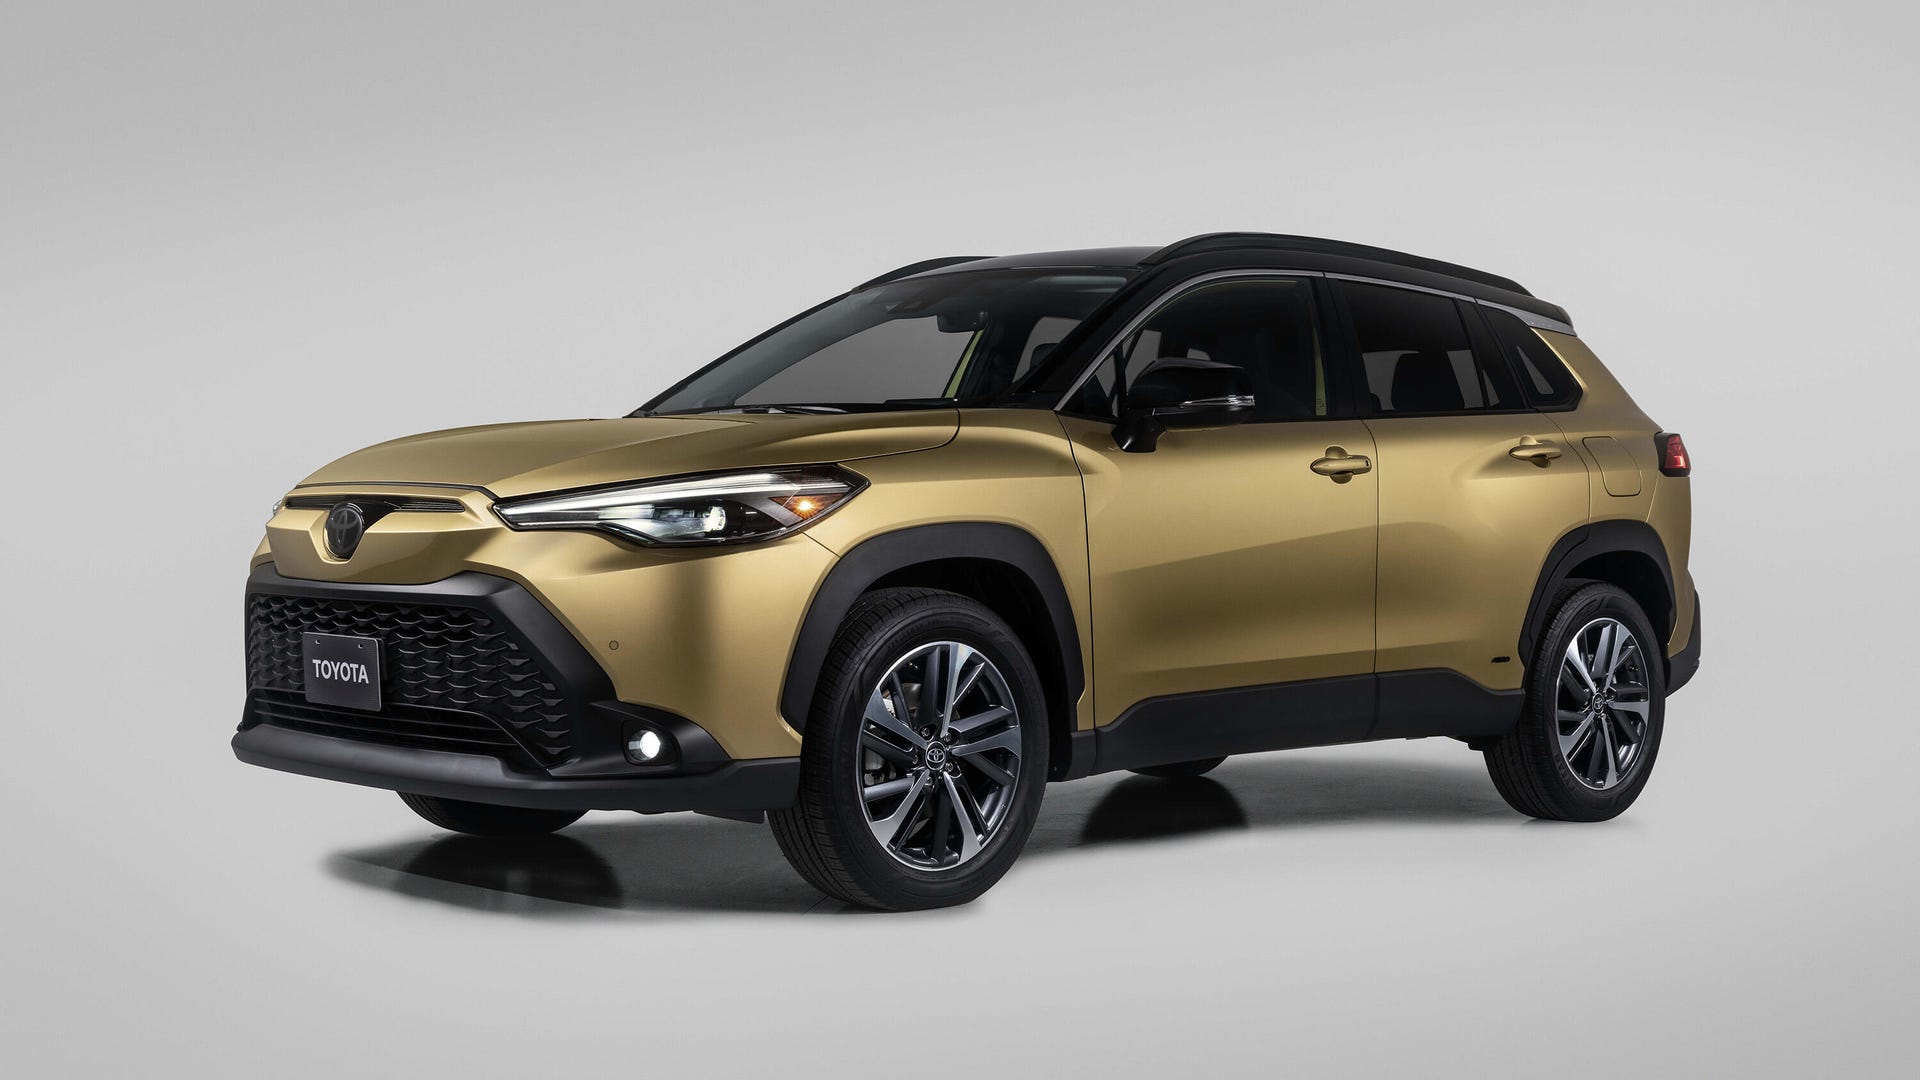 2023 Toyota Corolla Cross SUV review (inc. 0-100): More than just